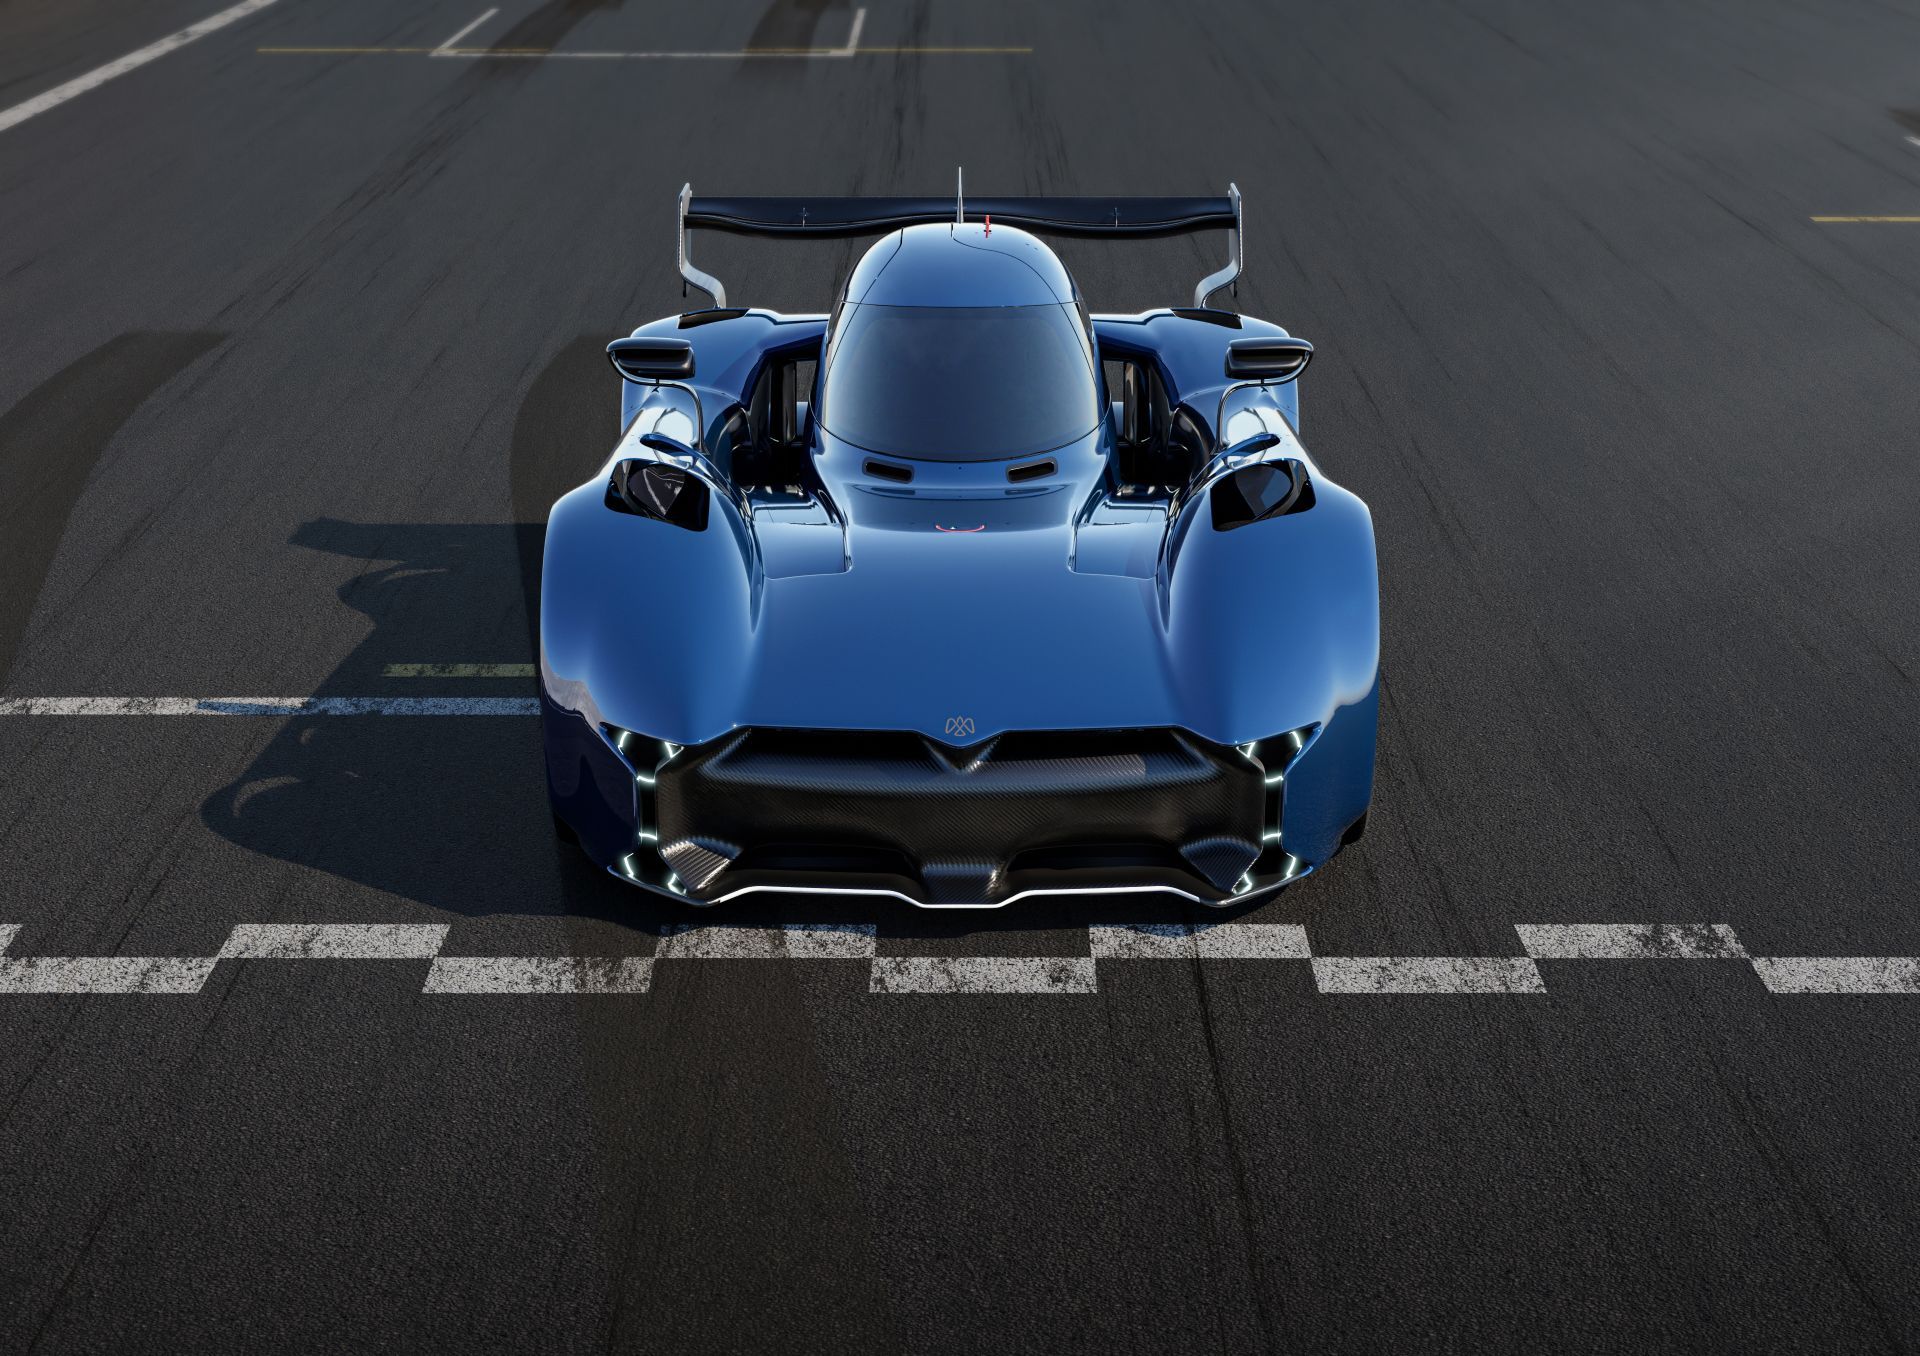 The Fastest, Most Dynamic Electric Hypercar You've Never Heard Of